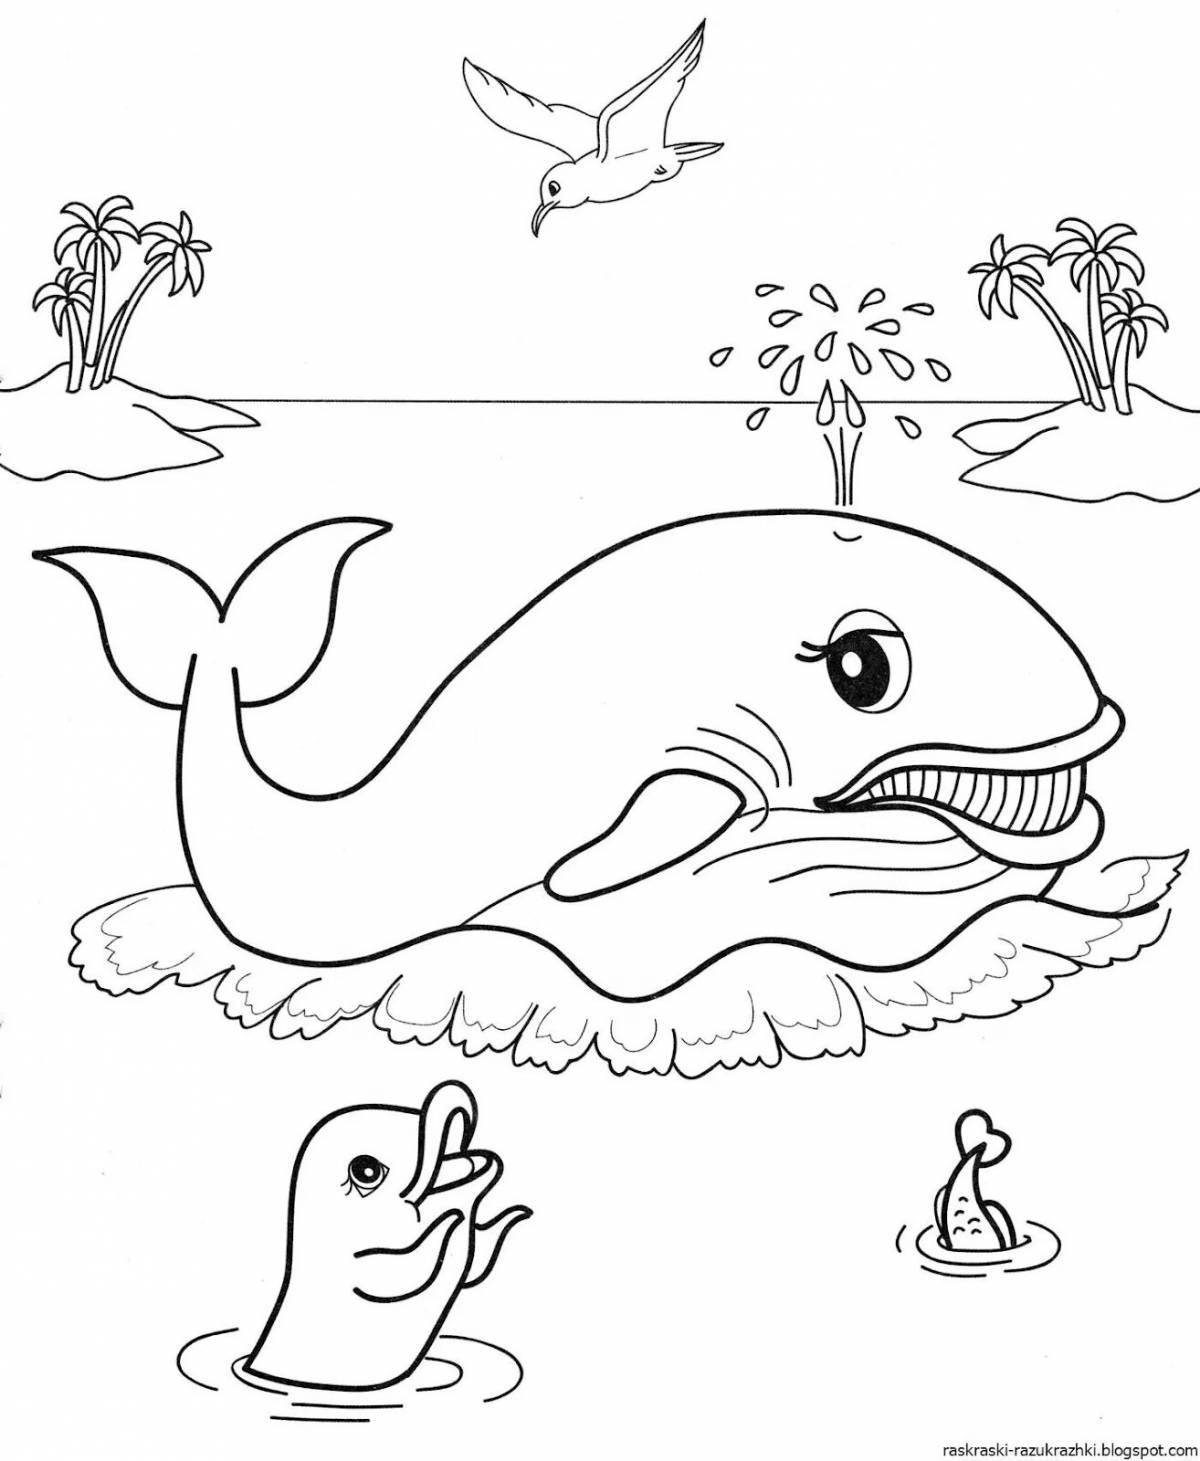 Fantastic ocean coloring page for kids